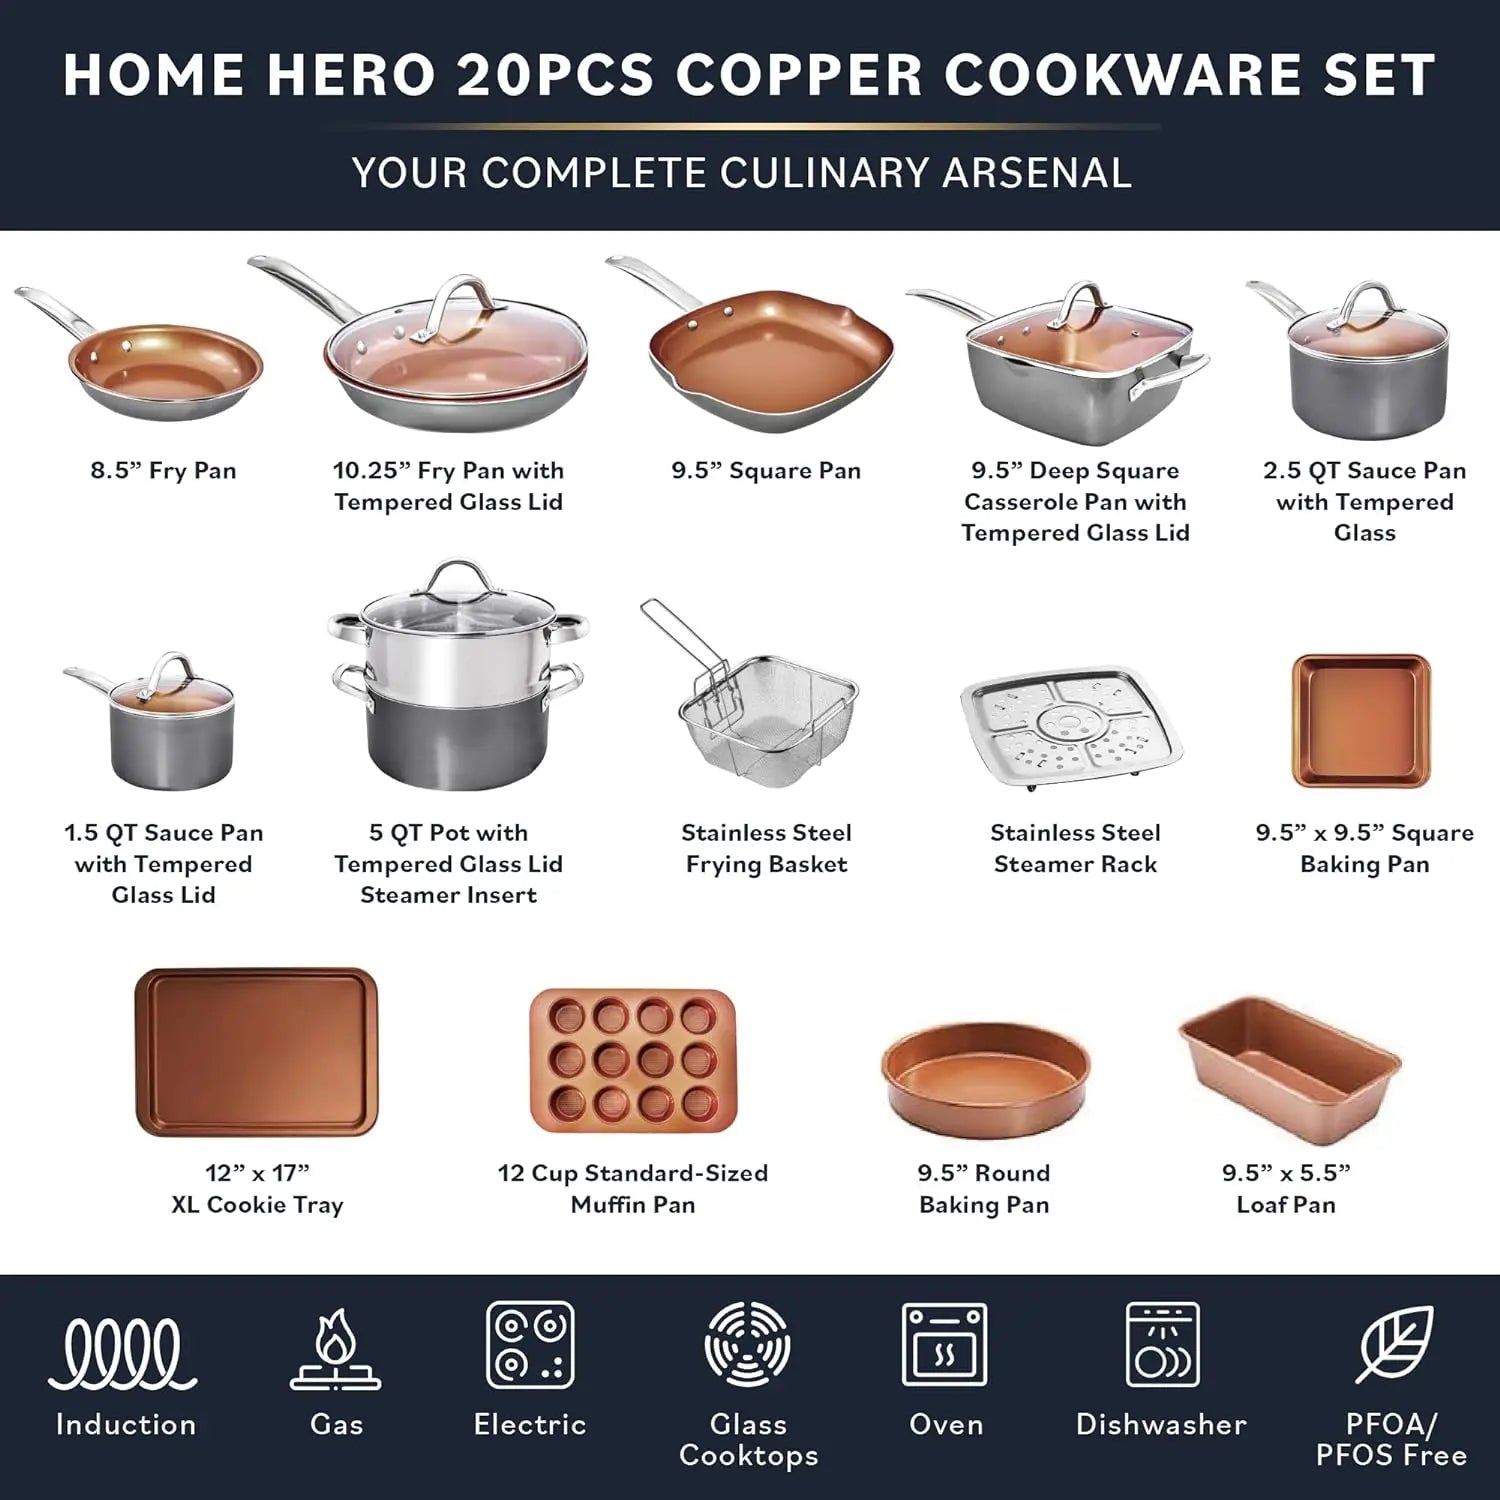 20 Pcs Pots and Pans Set Non Stick - All-In-One Induction Copper Cookware Set + Bakeware Set - Ceramic Coating ShopOnlyDeal